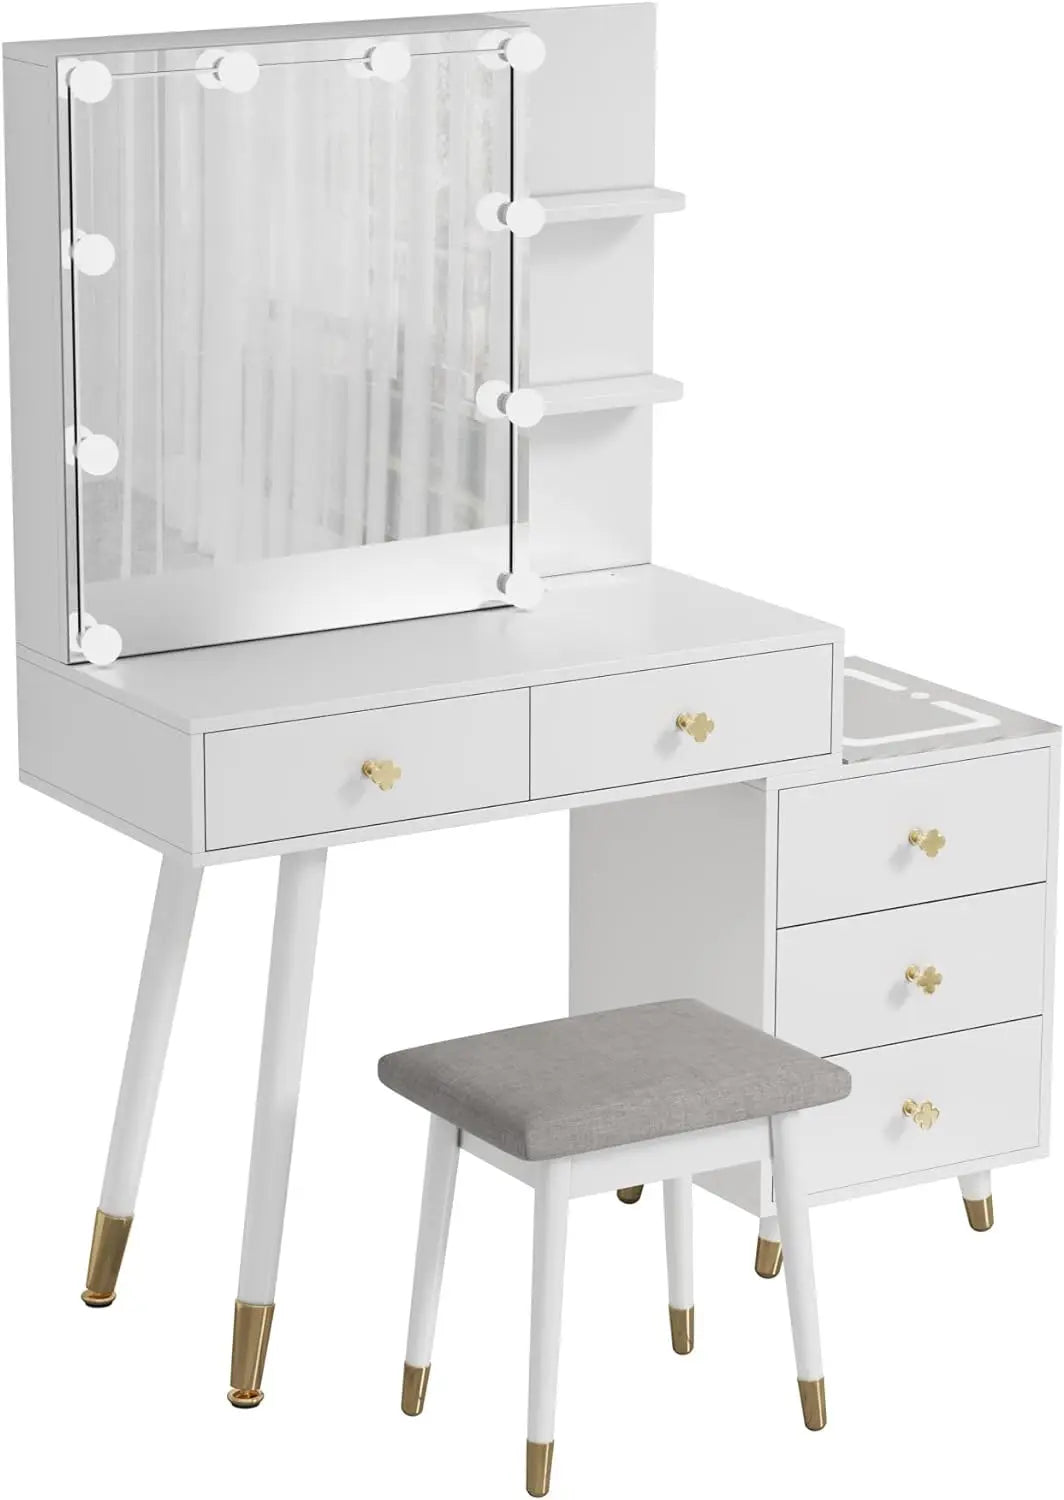 Vanity Desk with Lighted Mirror and Charging Station, Makeup Vanity Table with 5 Drawers and Storage Shelves